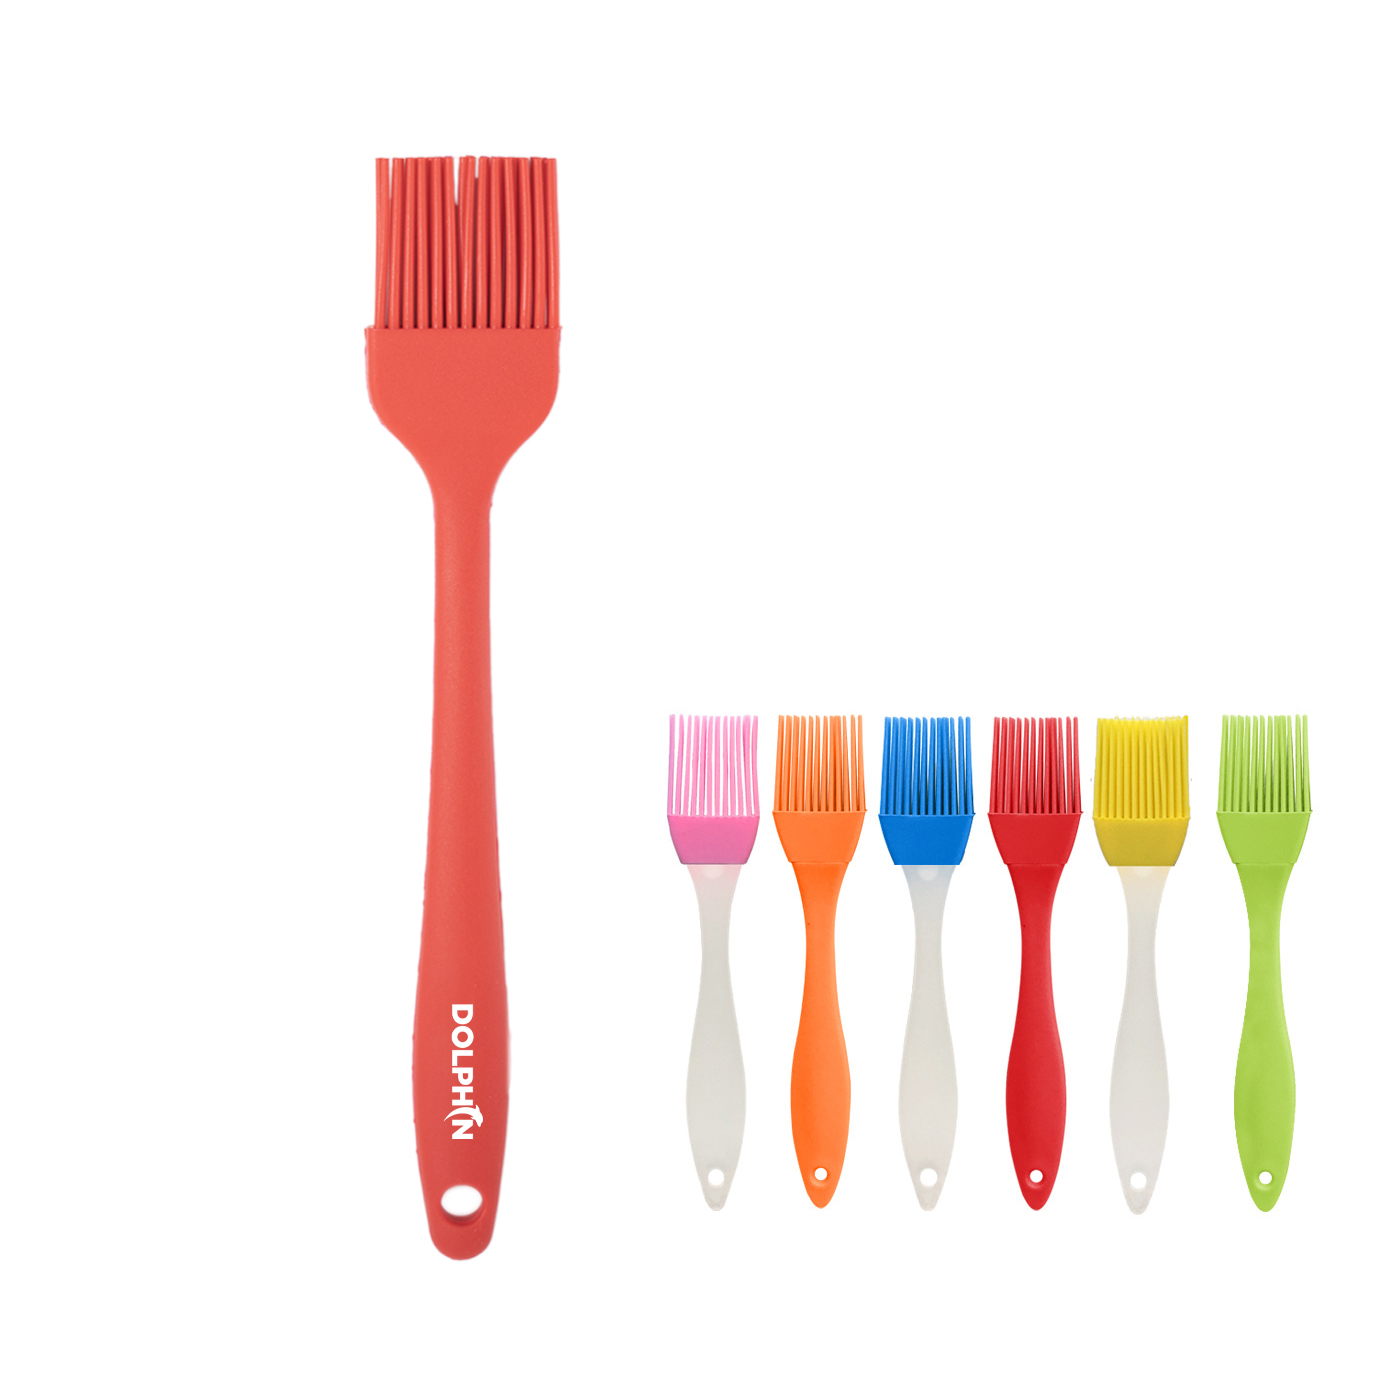 Heat Resistant Silicone Pastry Brush